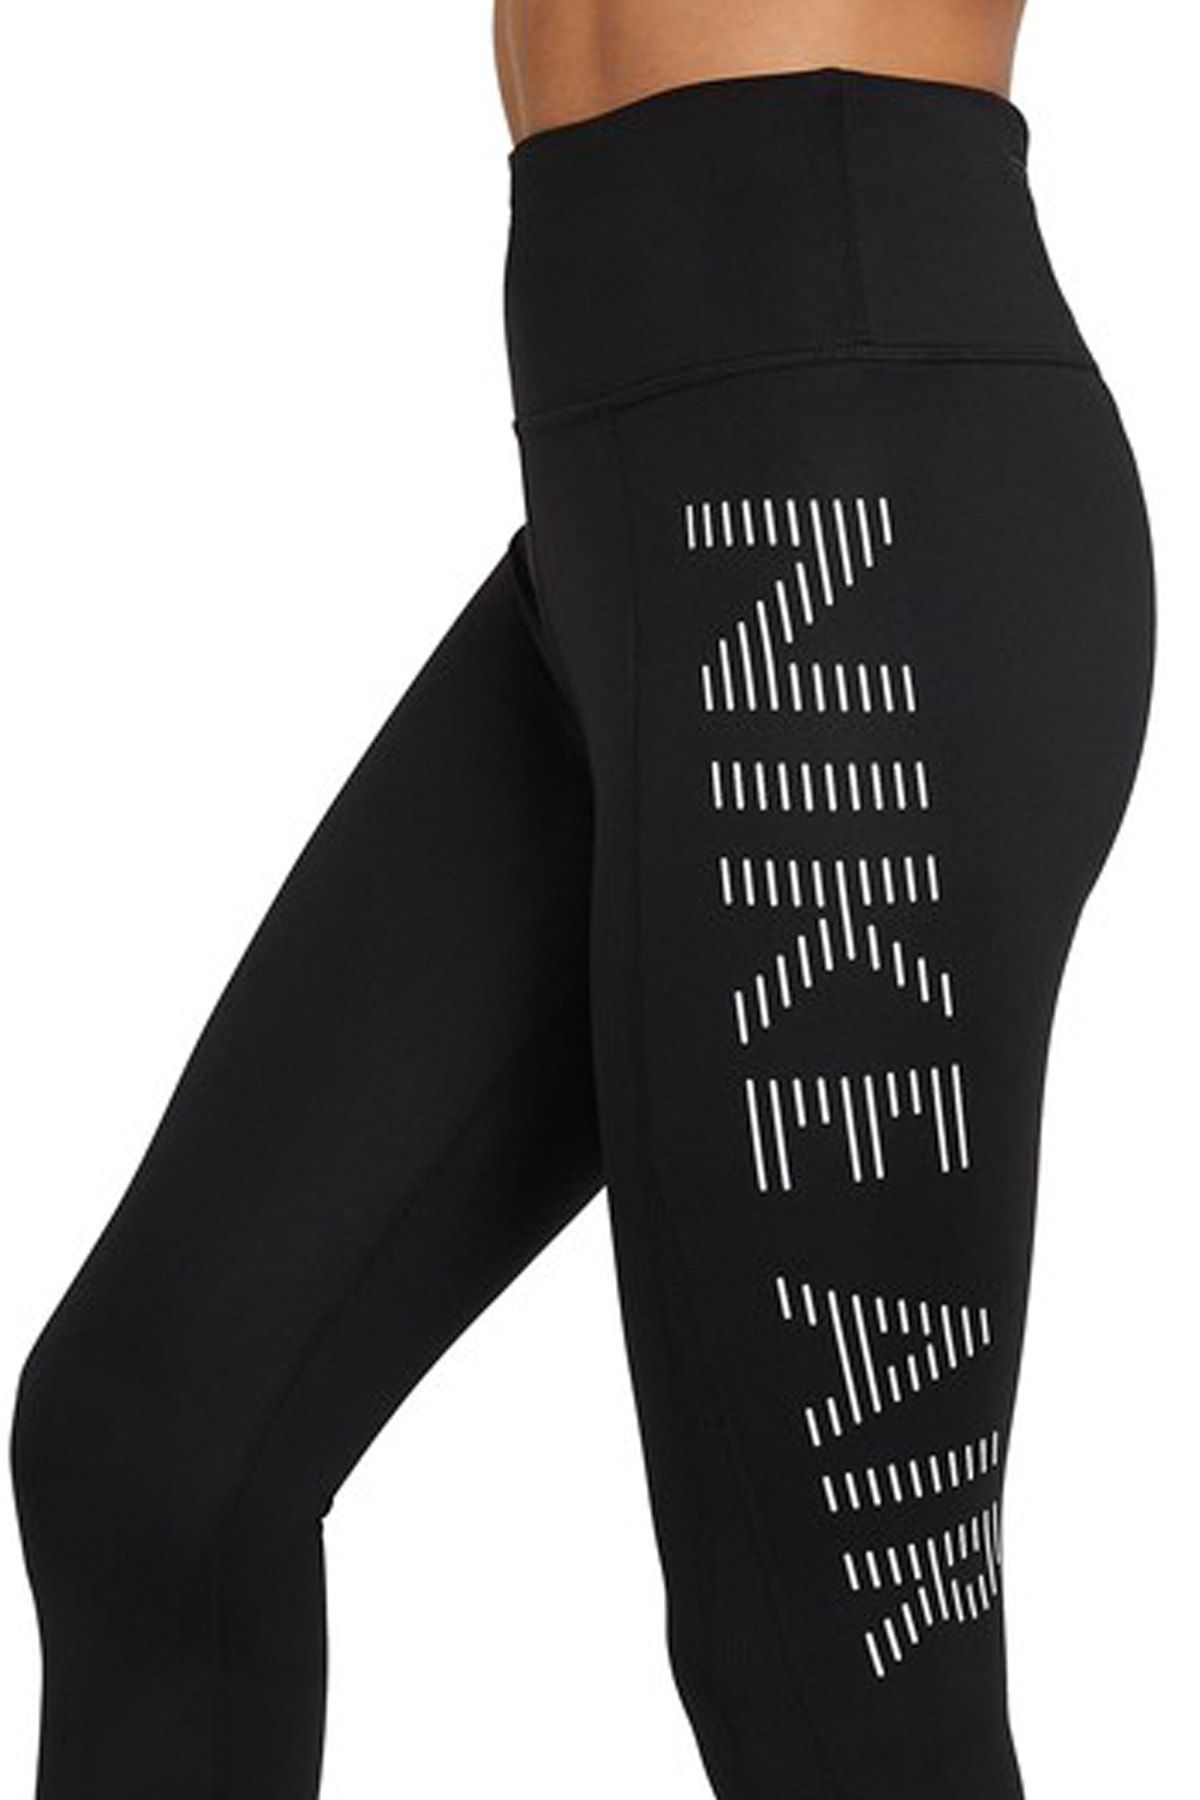 NIKE WOMEN’S Small EPIC LUX 7/8 RUNNING TIGHTS #CJ2247 644 RETAIL $120